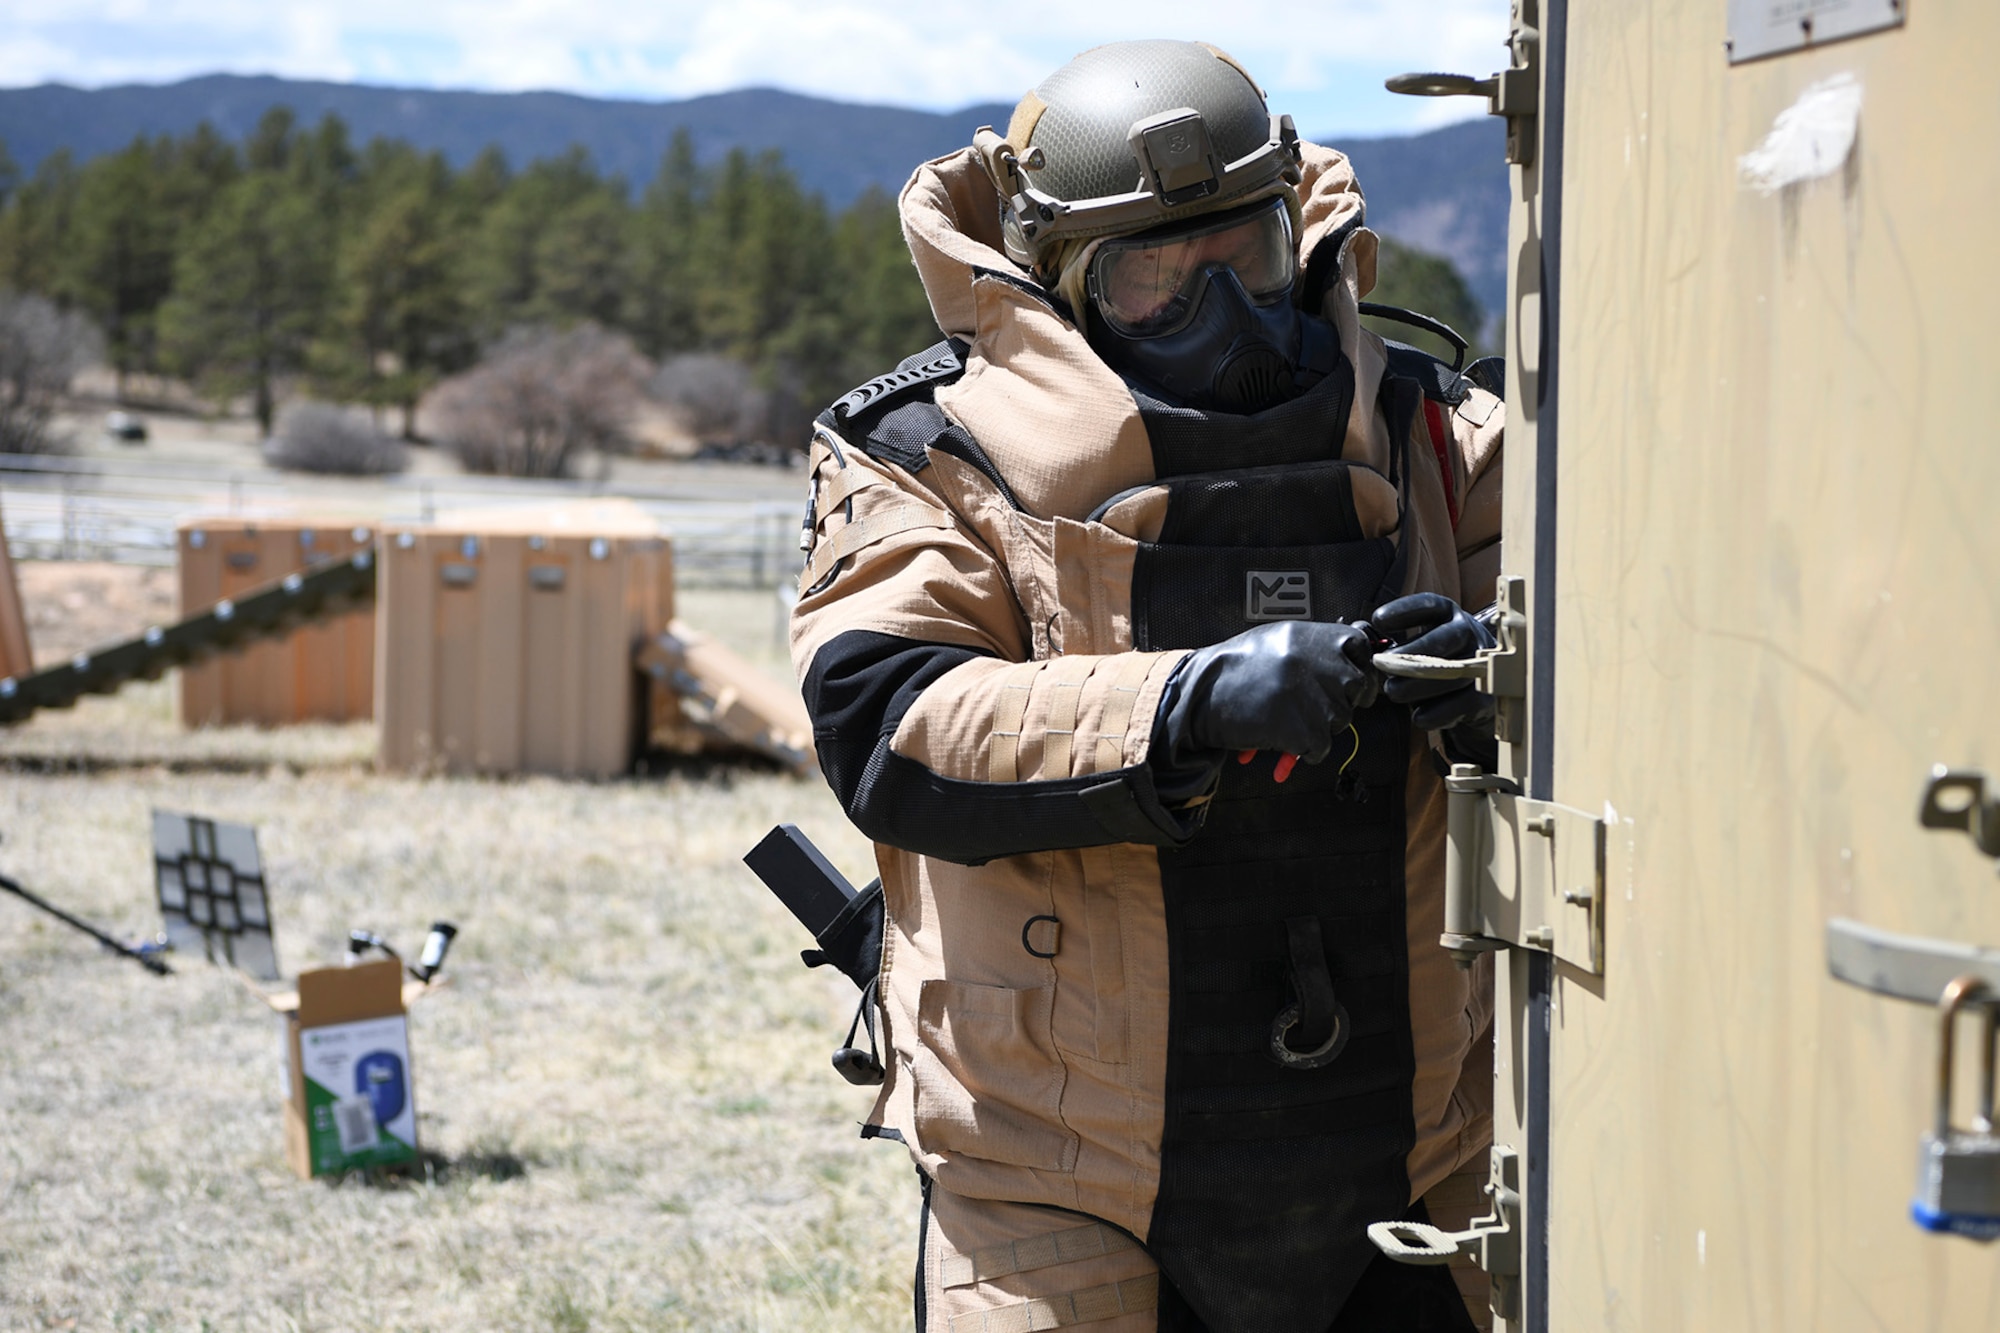 Reservists participate in 4-day training exercise.